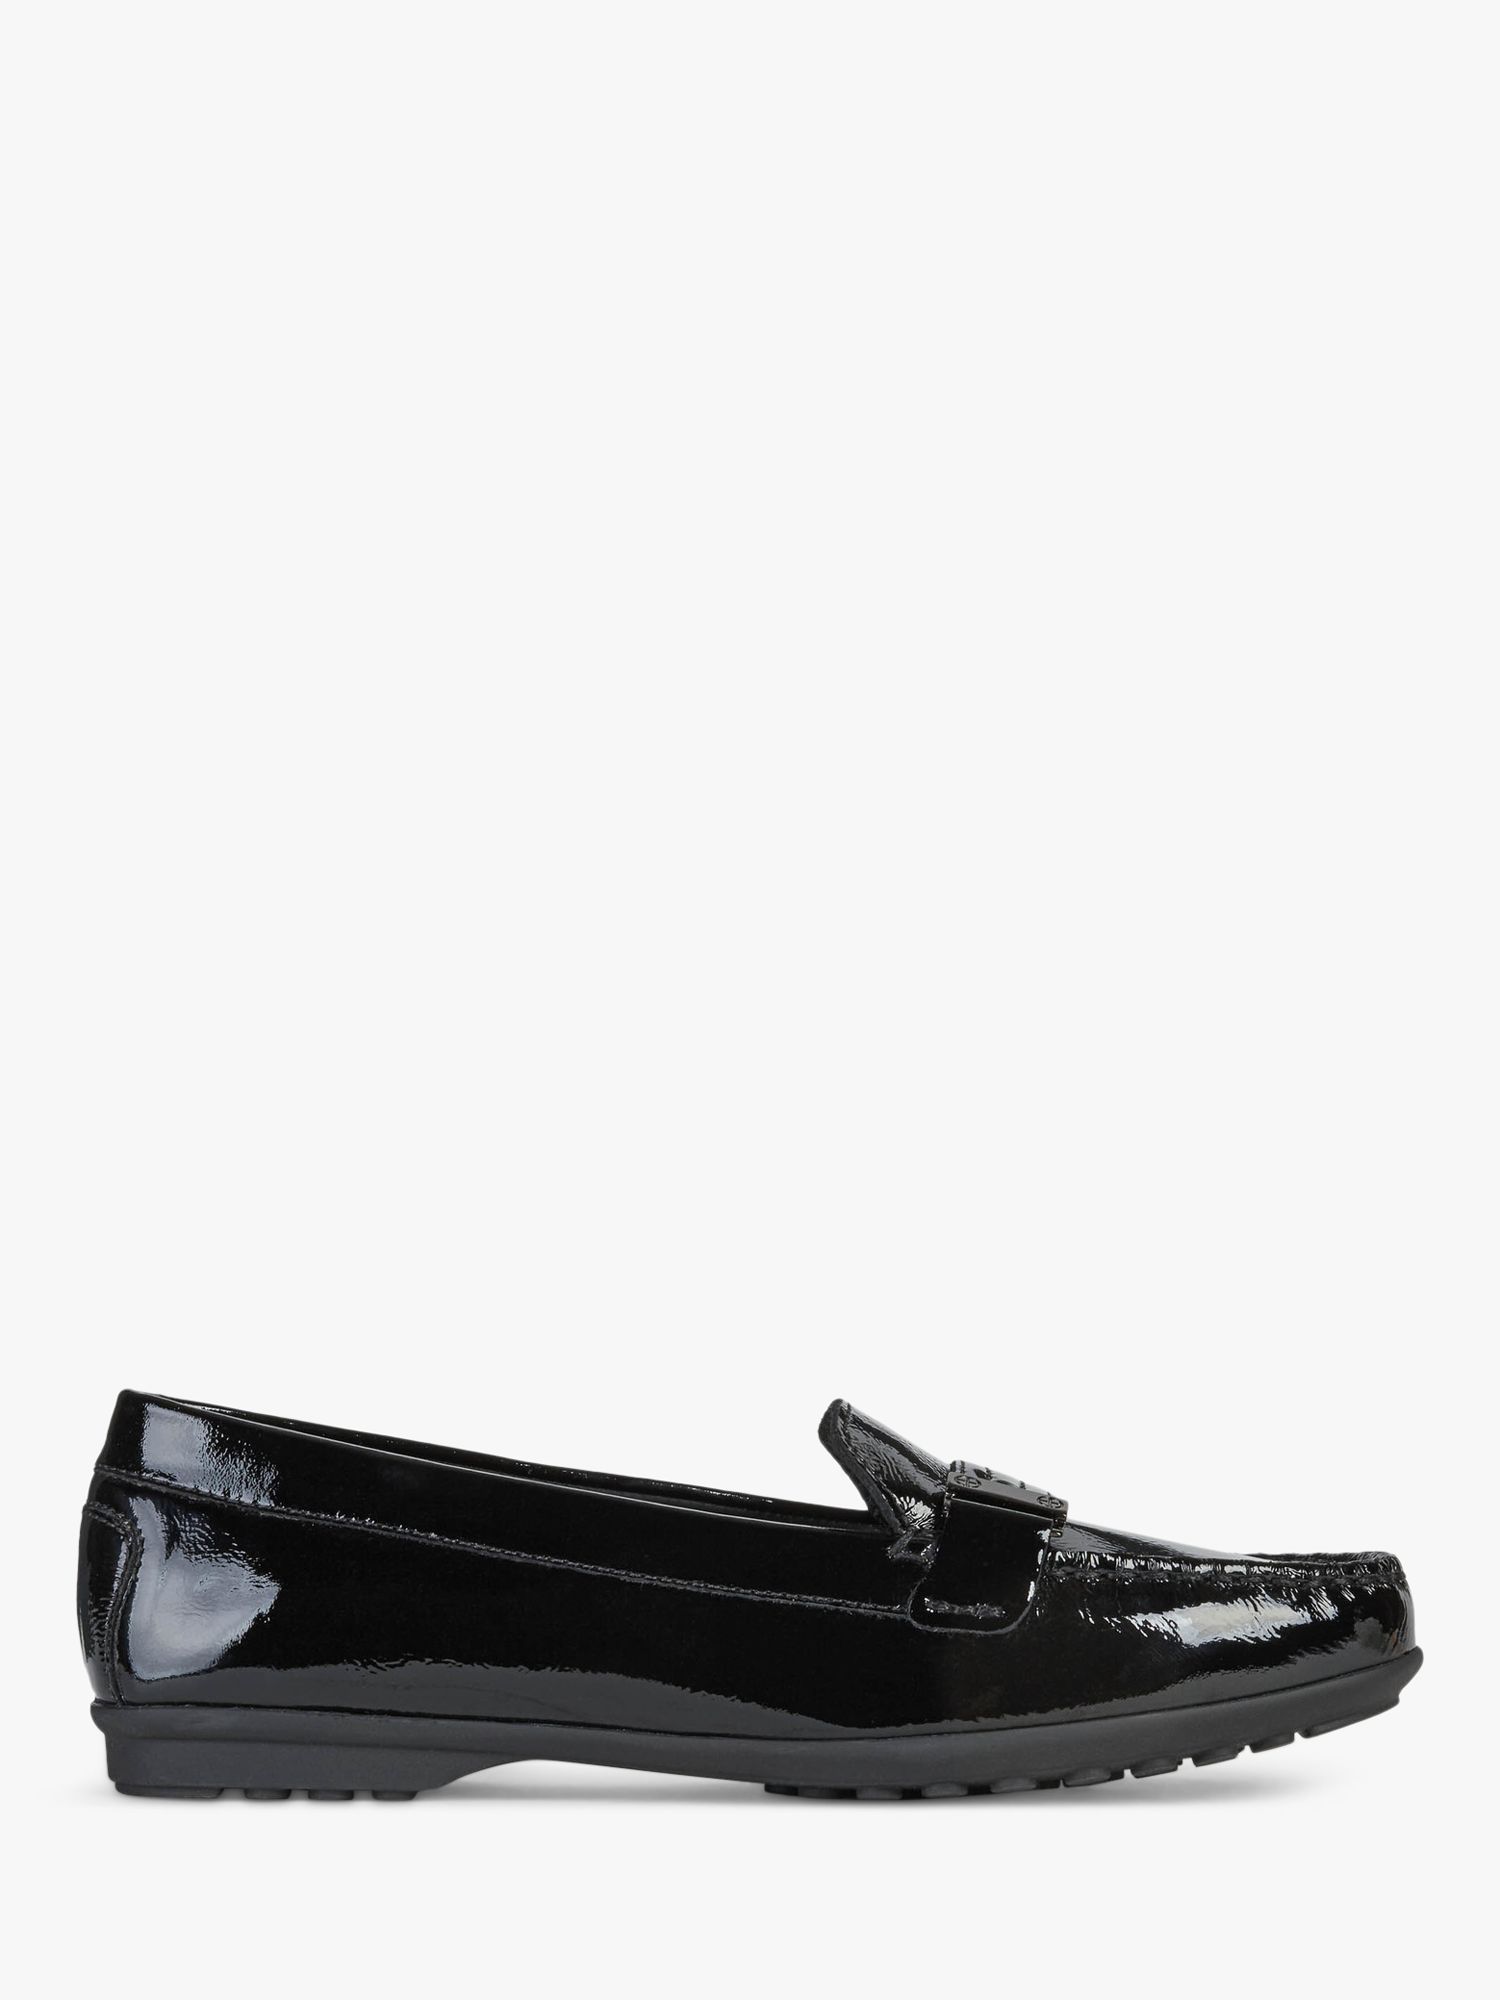 Geox Women's Elidia Patent Leather Loafers, Black at John Lewis & Partners